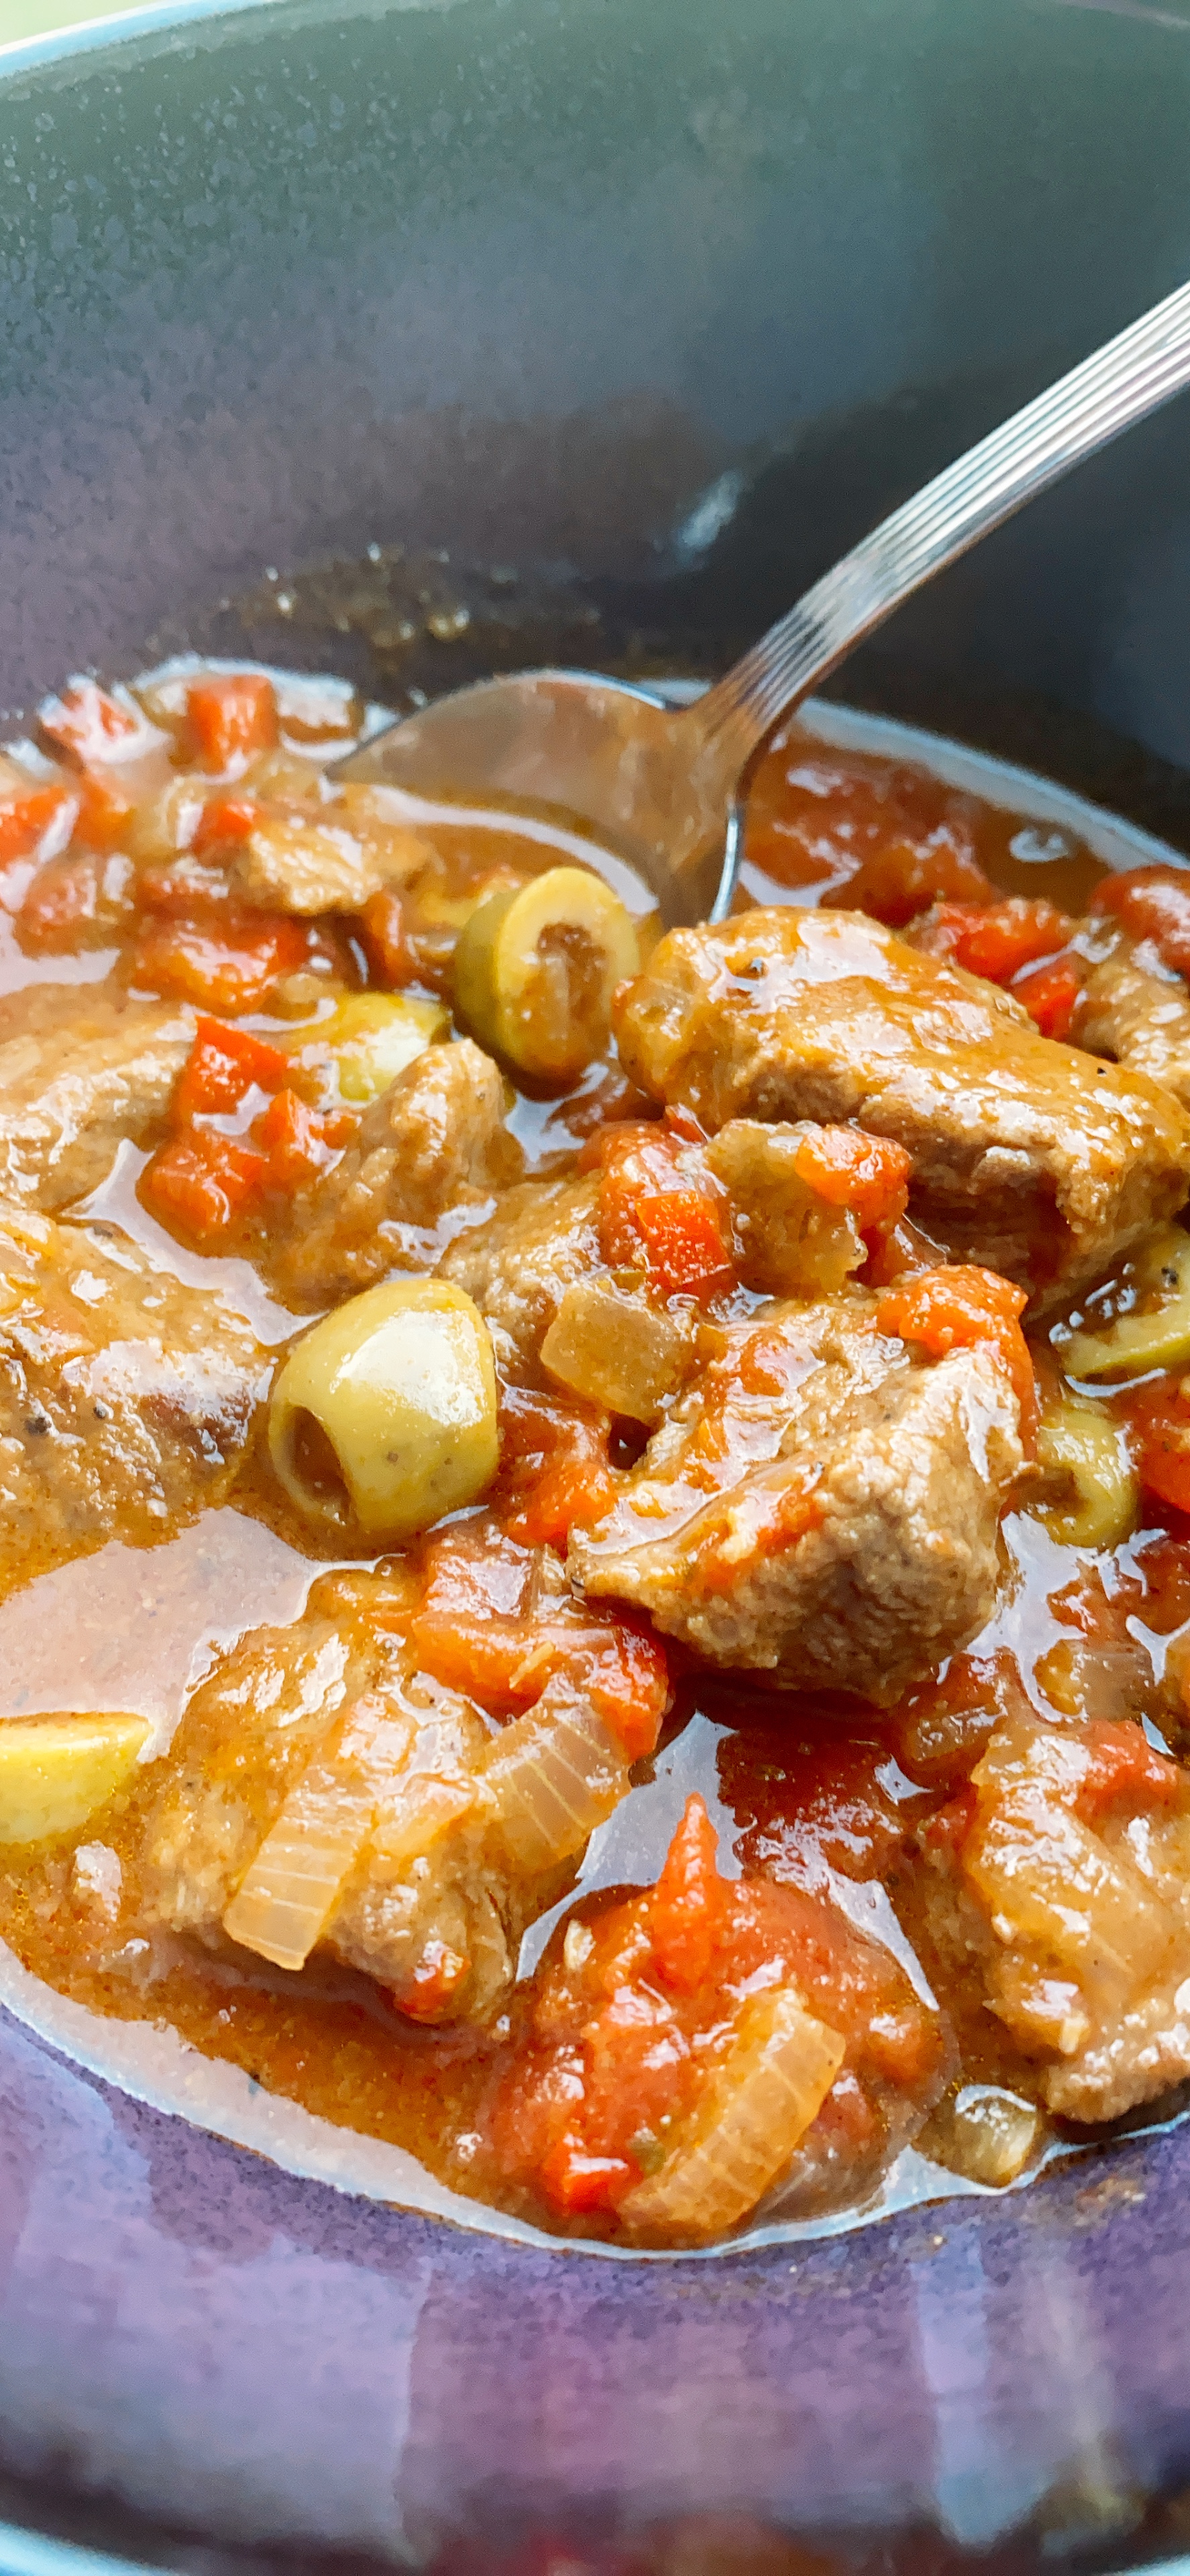 Hearty Spanish Beef Stew